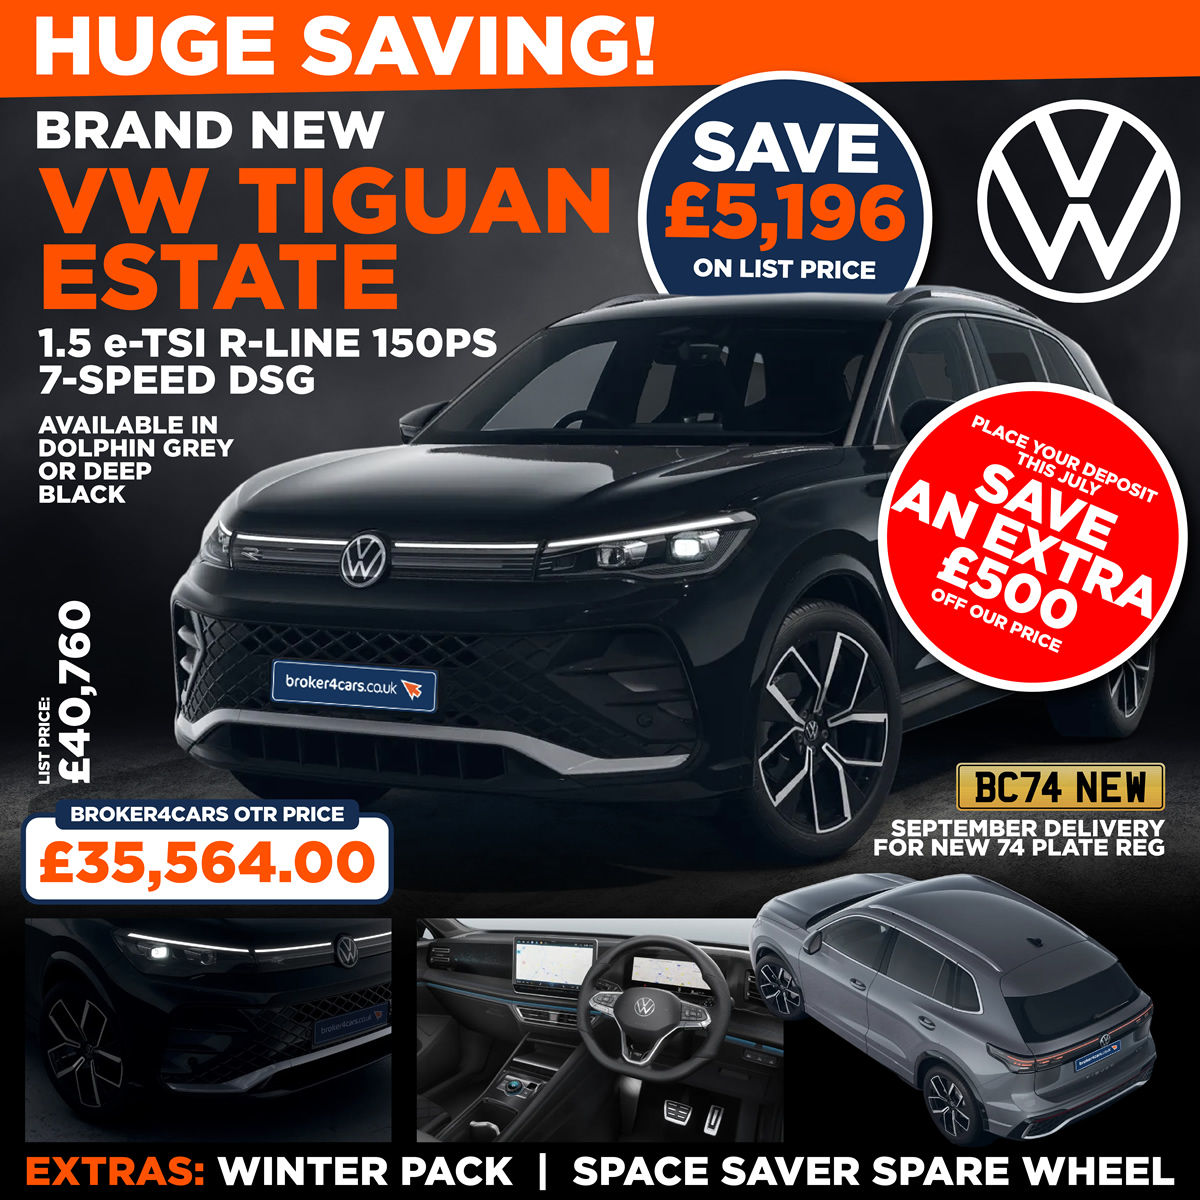 NEW VW TIGUAN ESTATE 1.5 e-TSI R-Line 150ps 7-speed DSG. Available in Dolphin Grey or Deep Black. Winter Pack. Space Saver Spare Wheel. VW's are currently due September for the new 74 plate registration. List Price £40,760 so saving £5,196. Broker4Cars Price £35,564 OTR. Place your deposit this July, save an extra £500